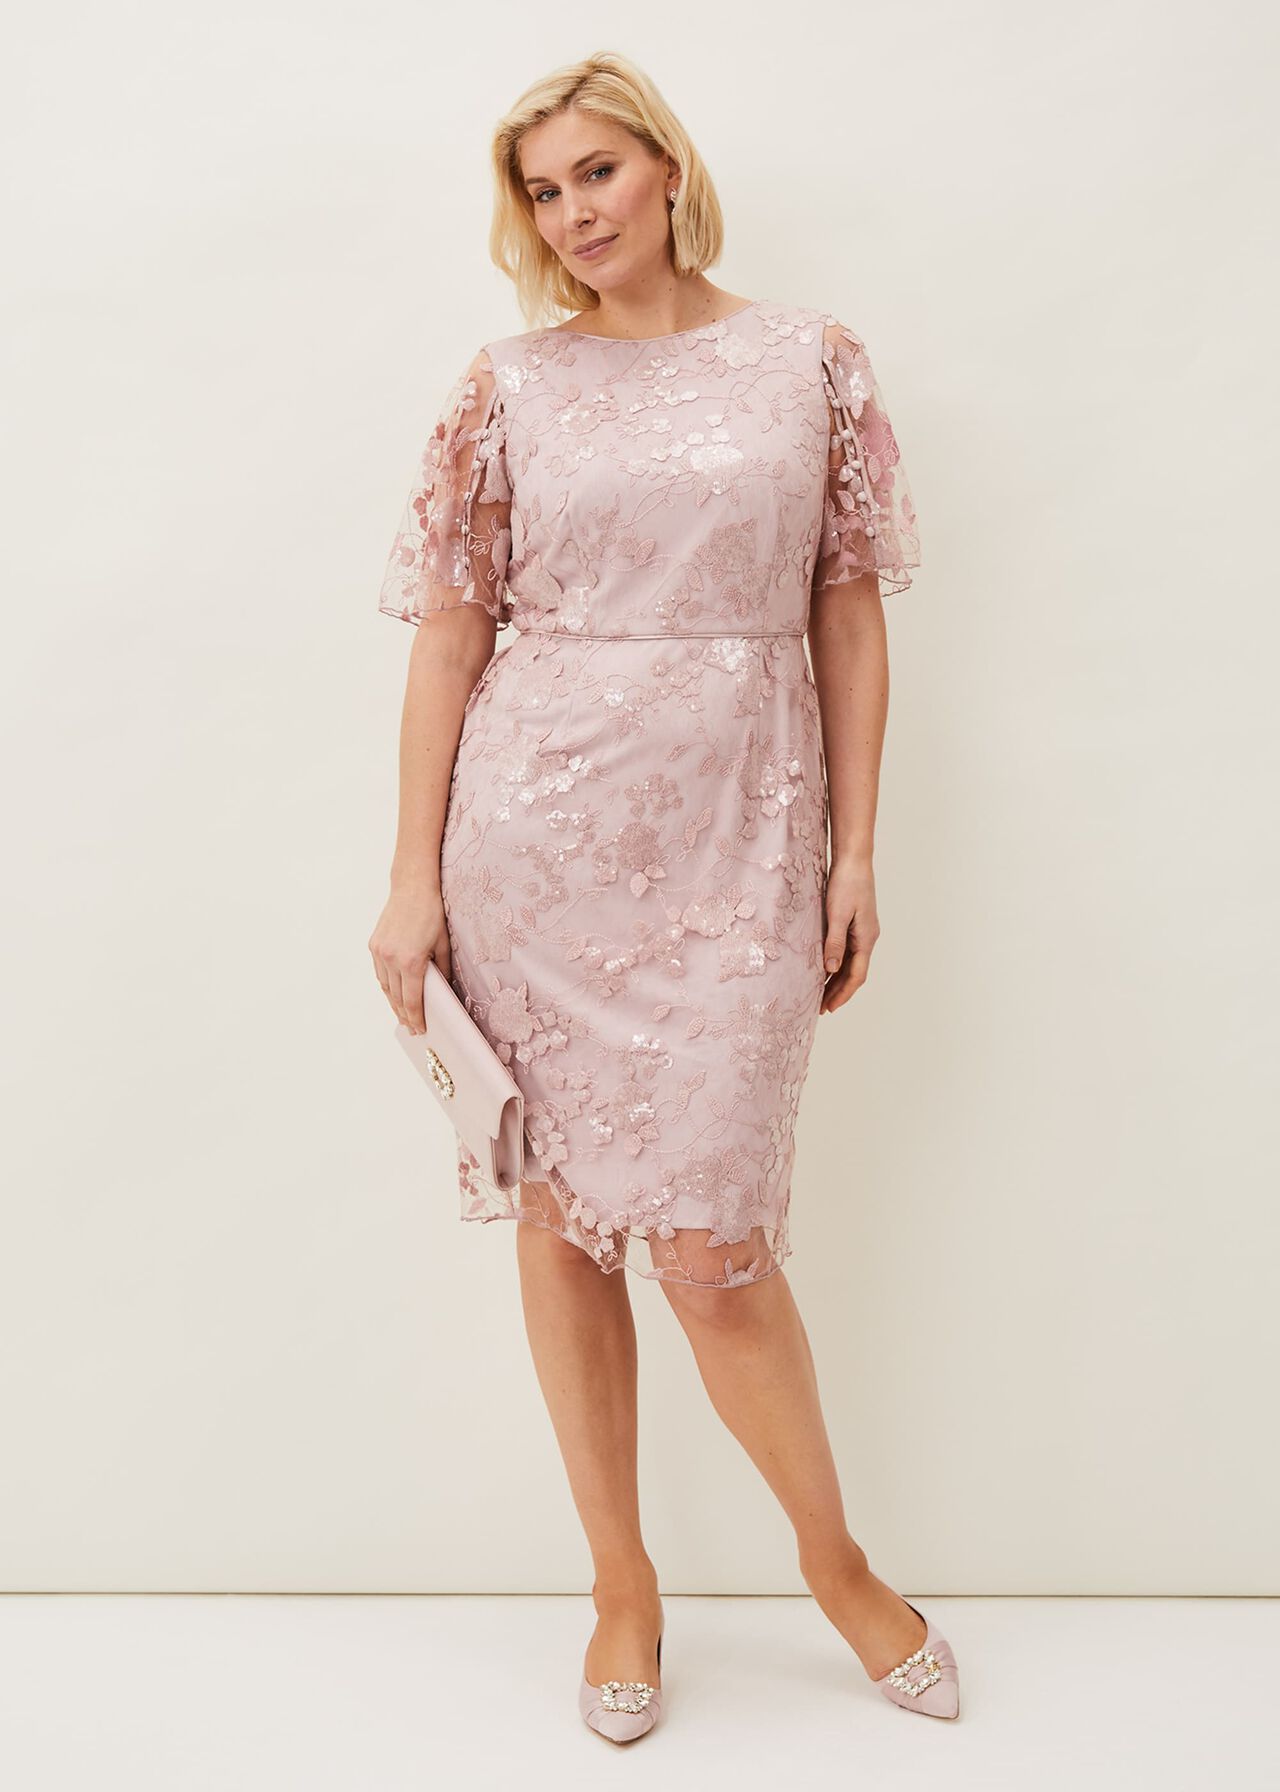 Harlow Sequin Lace Dress | Phase Eight